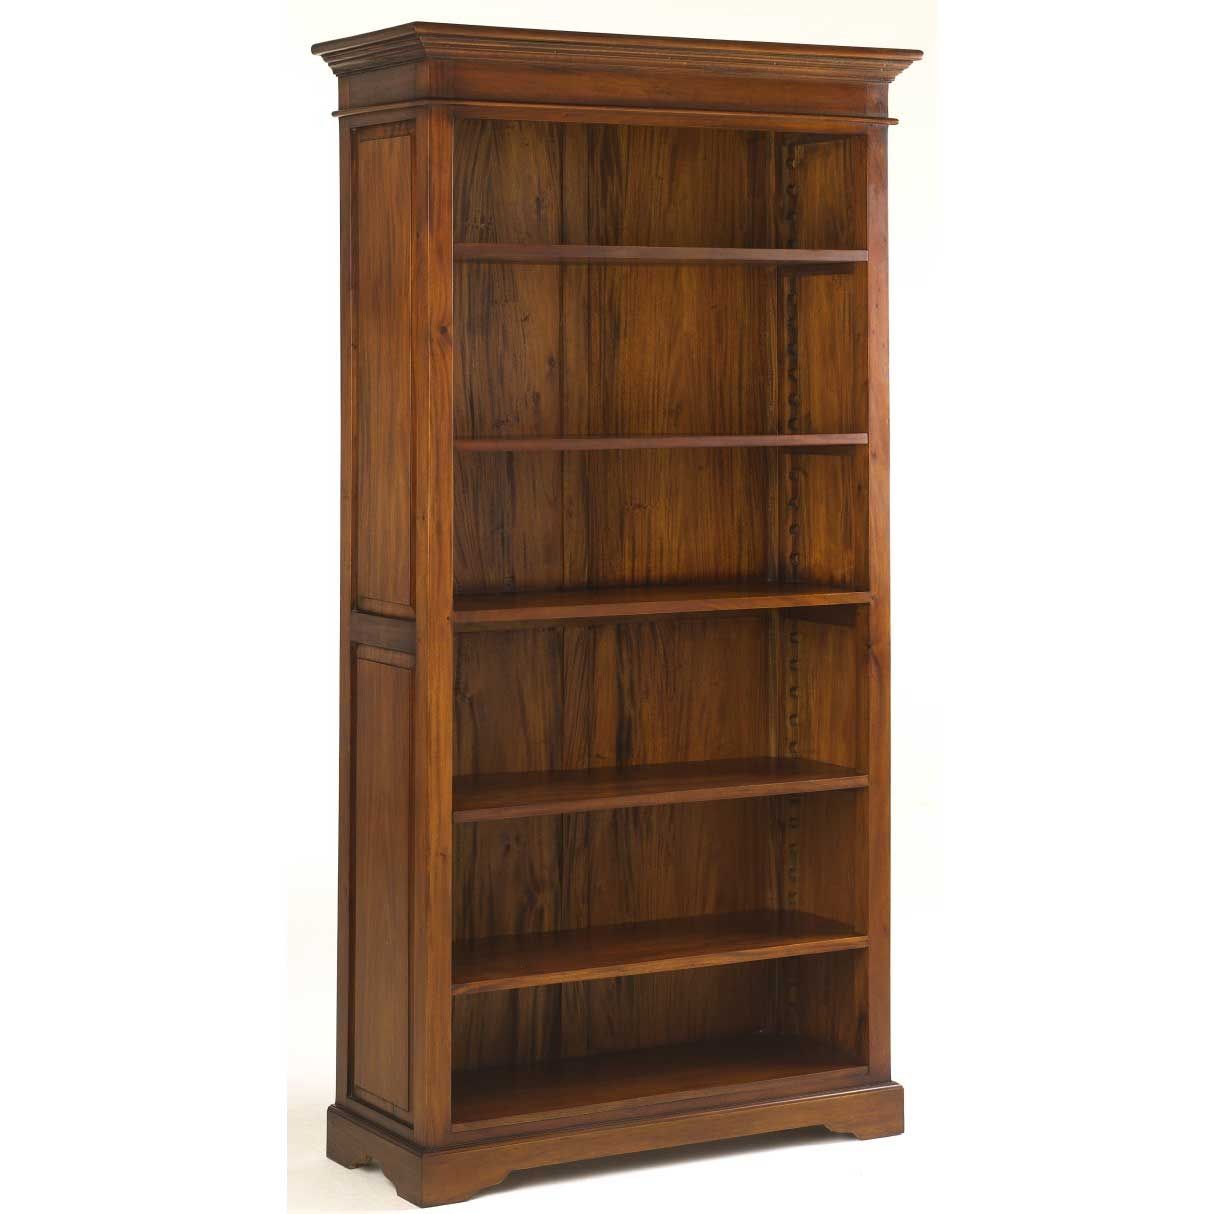 Solid Oak Bookcases In Seven Sizes Roselawnlutheran For Large Solid Wood Bookcase (View 2 of 15)